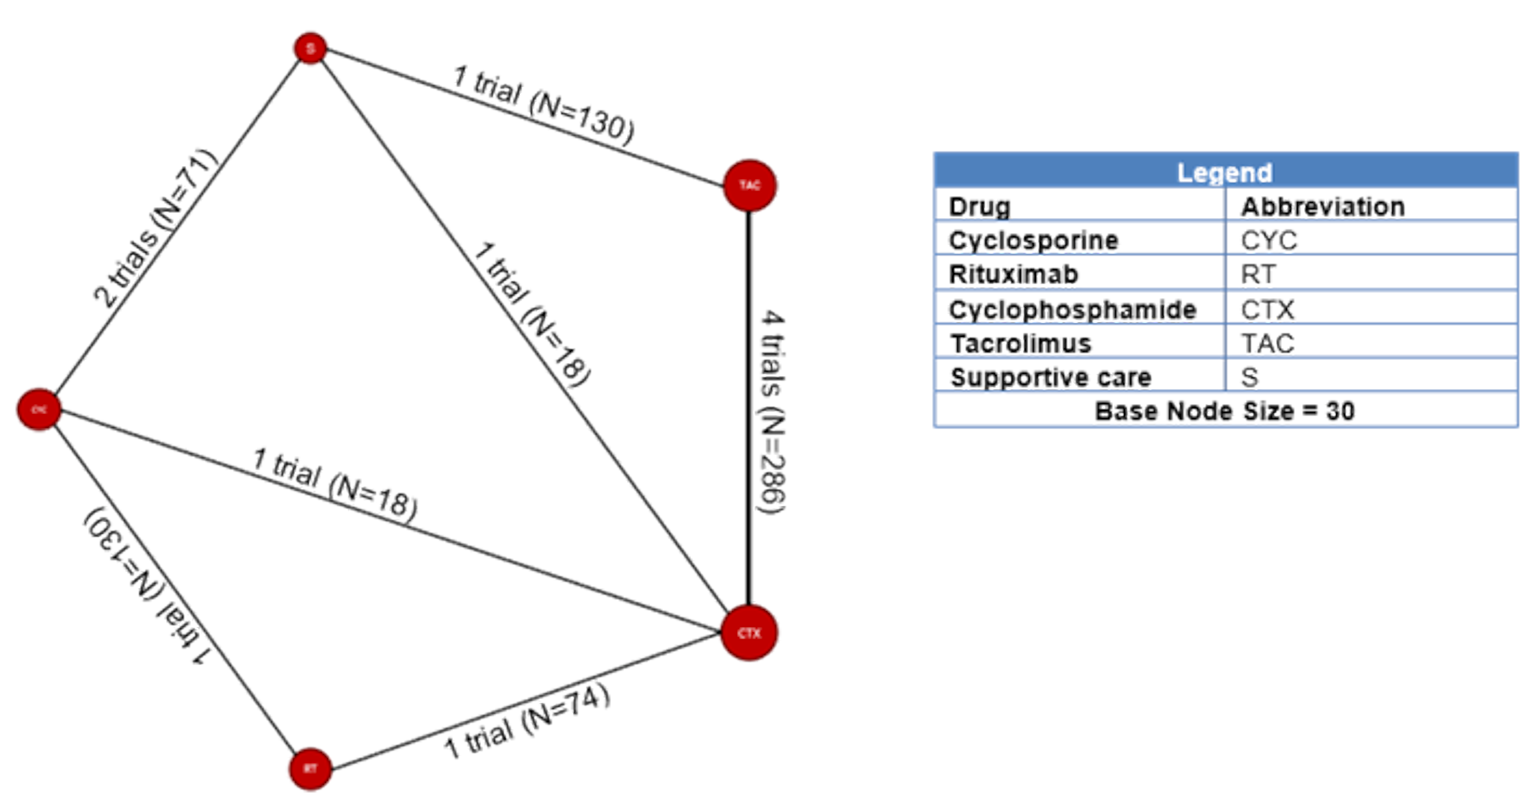 This figure shows the network meta-analysis for complete remission at 12 months.